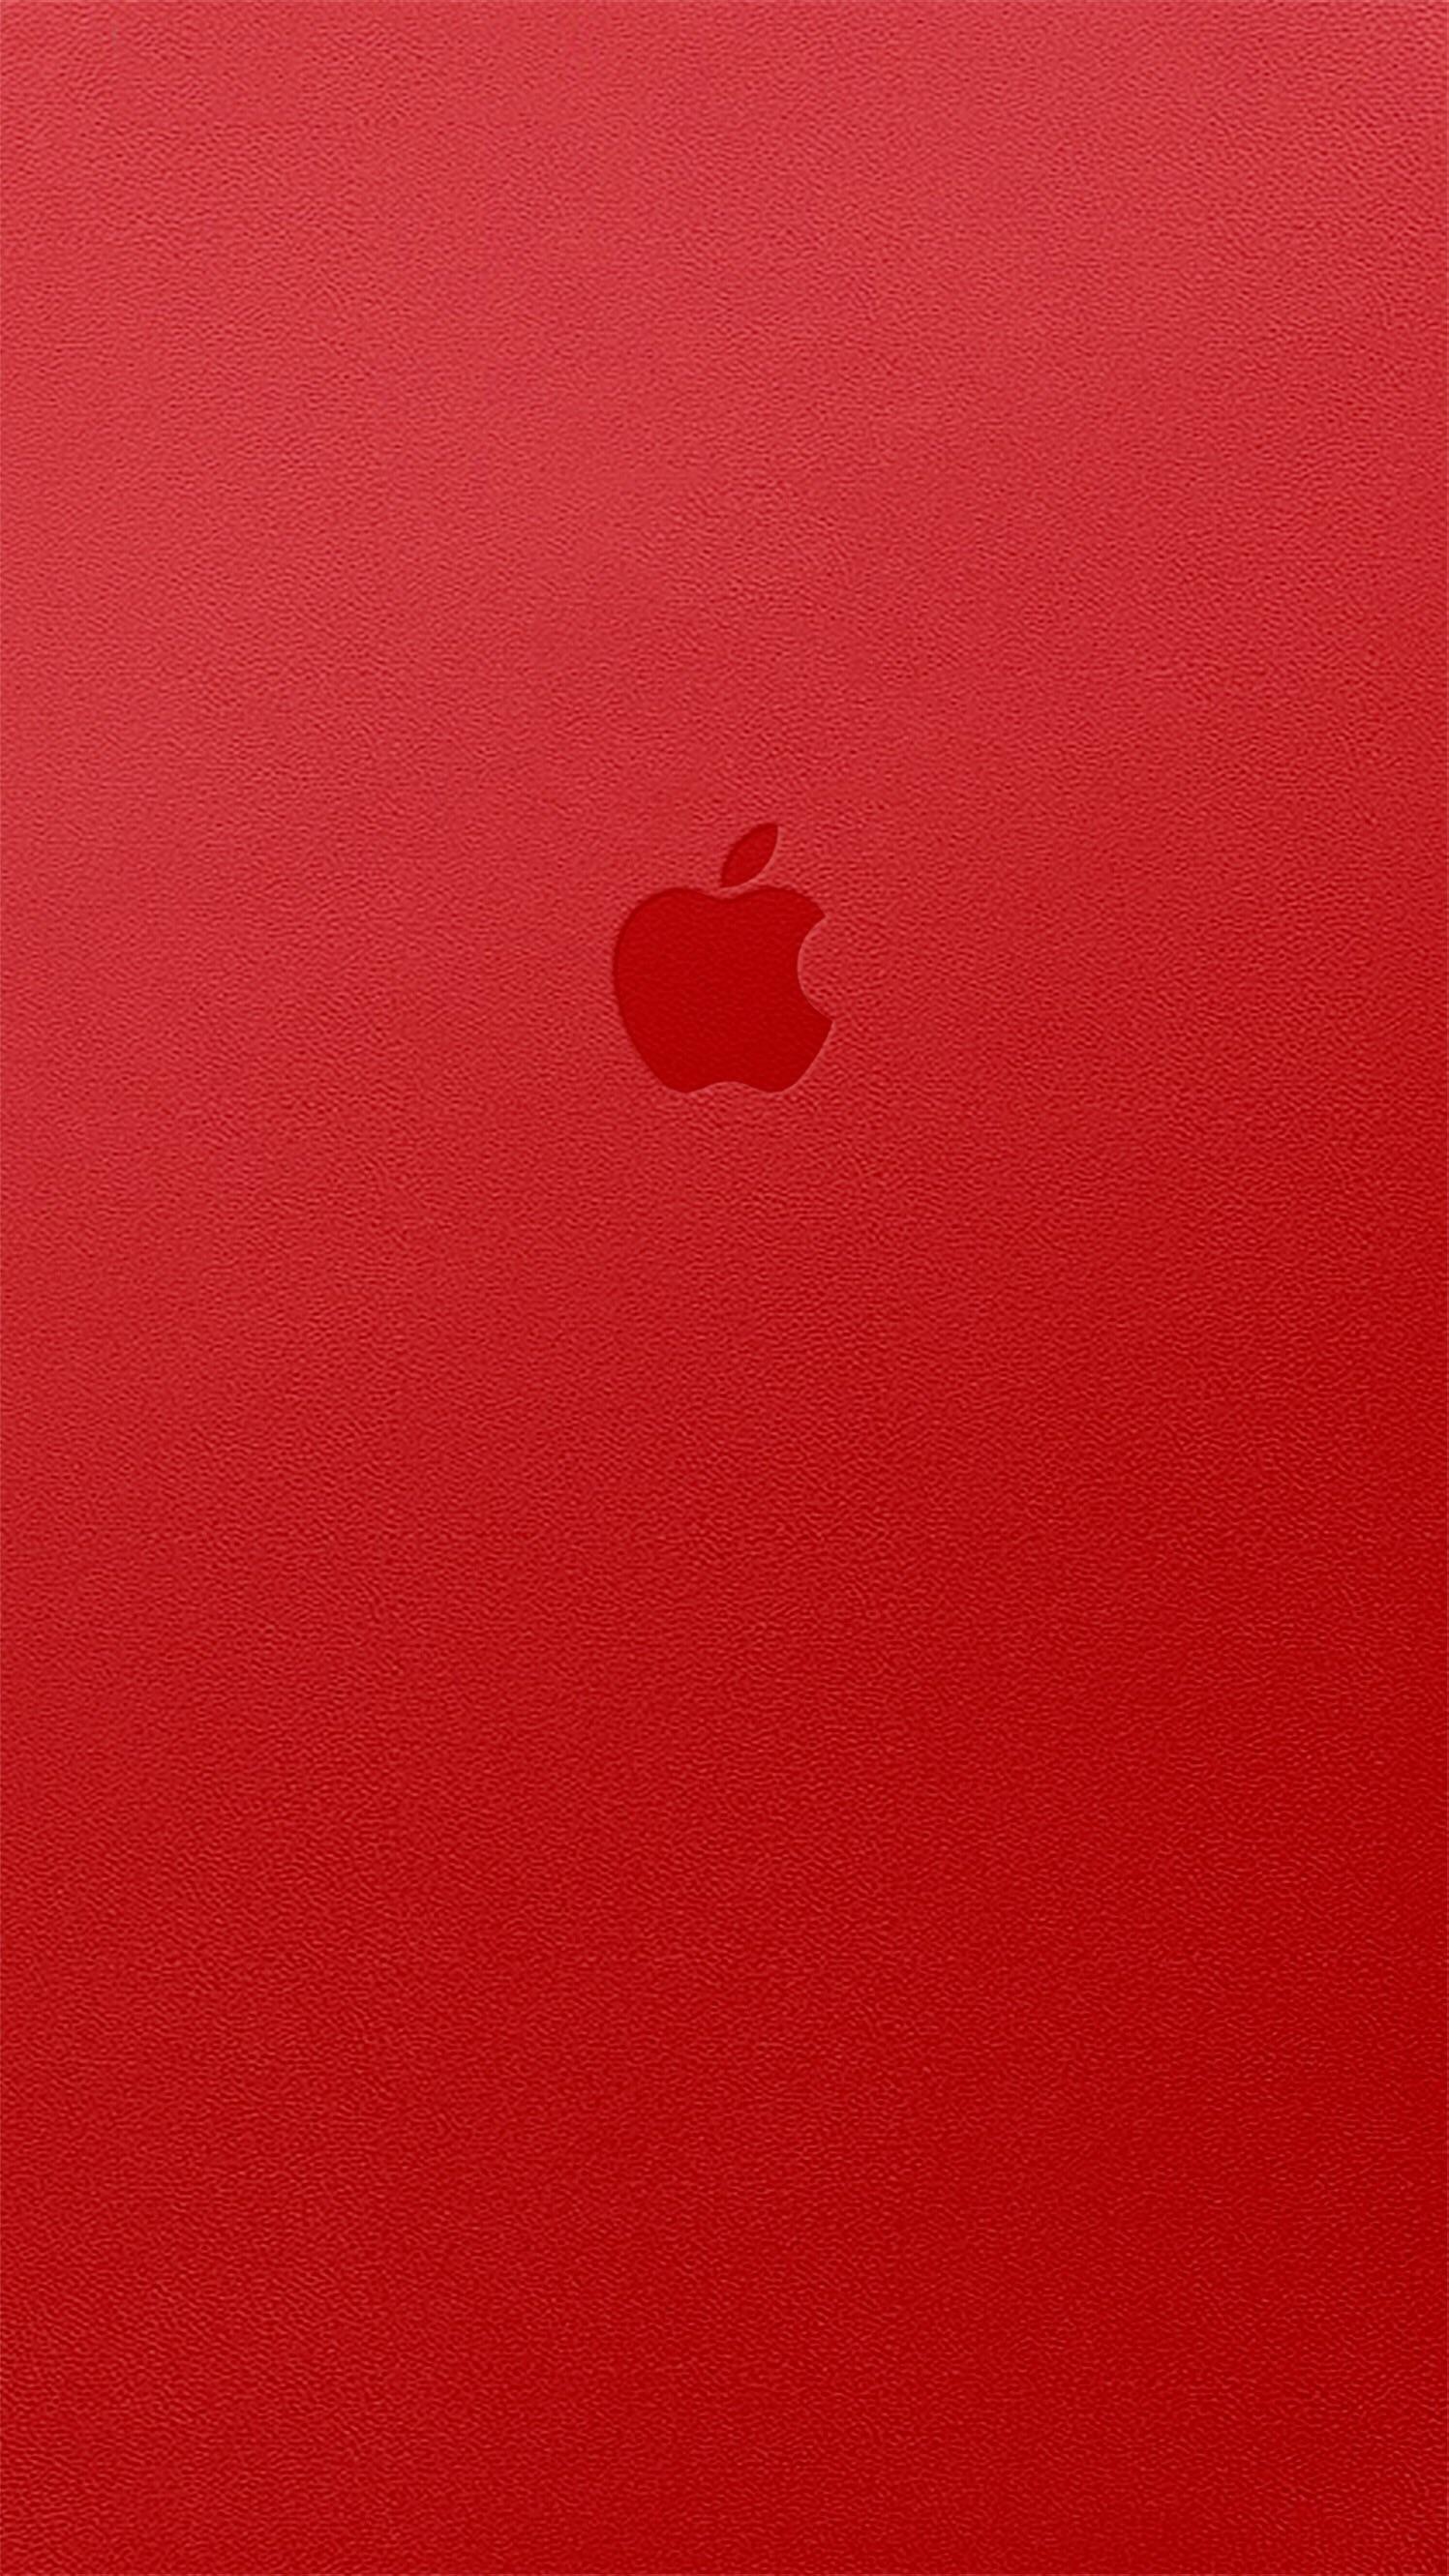 Red Iphone X Wallpapers